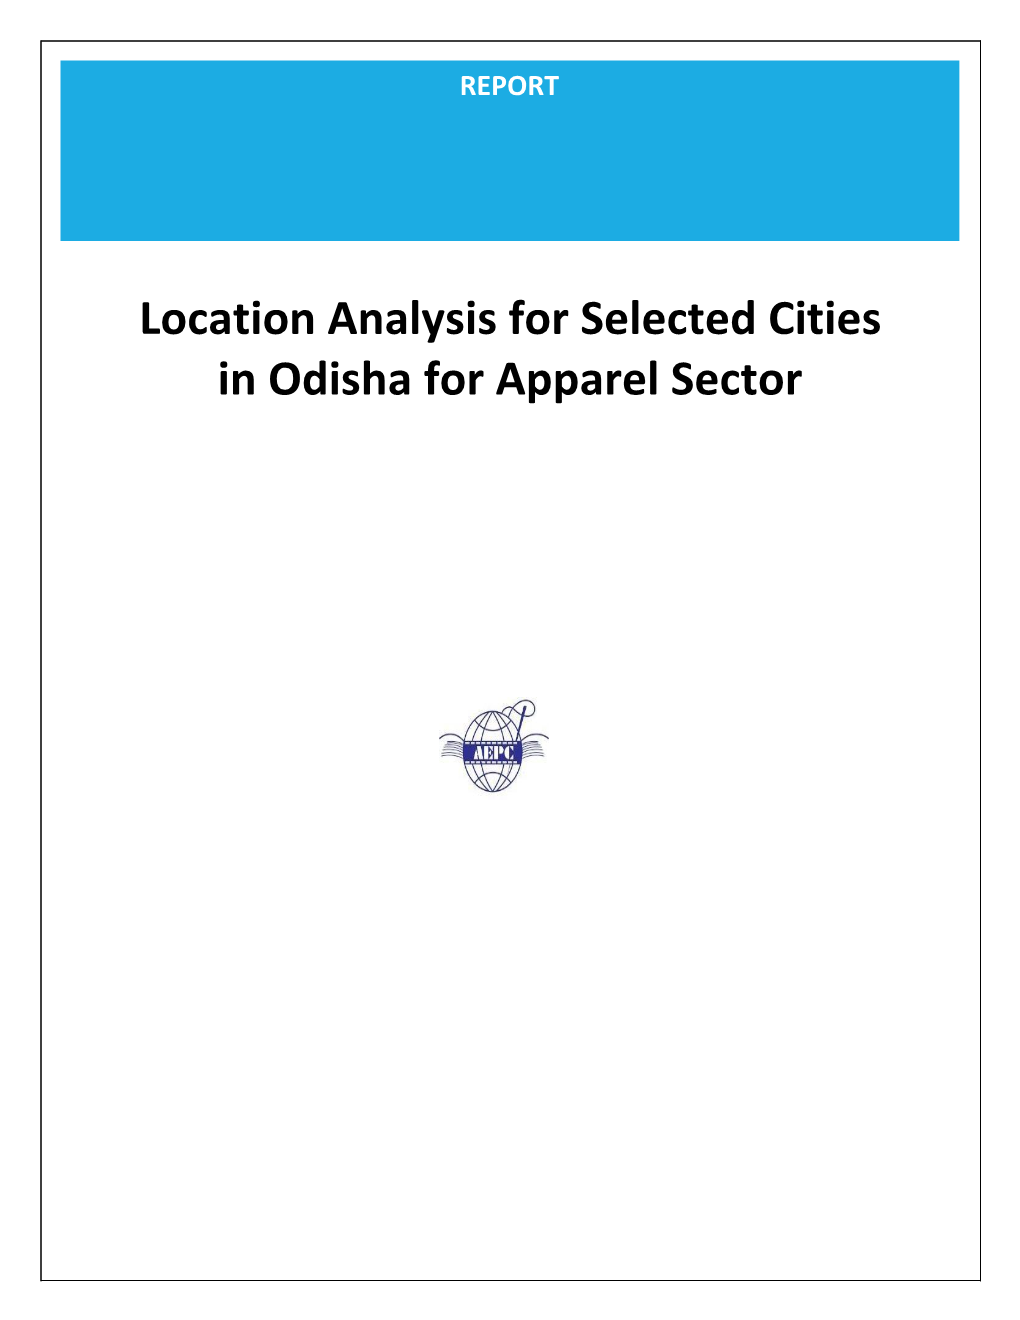 Location Analysis for Selected Cities in Odisha for Apparel Sector